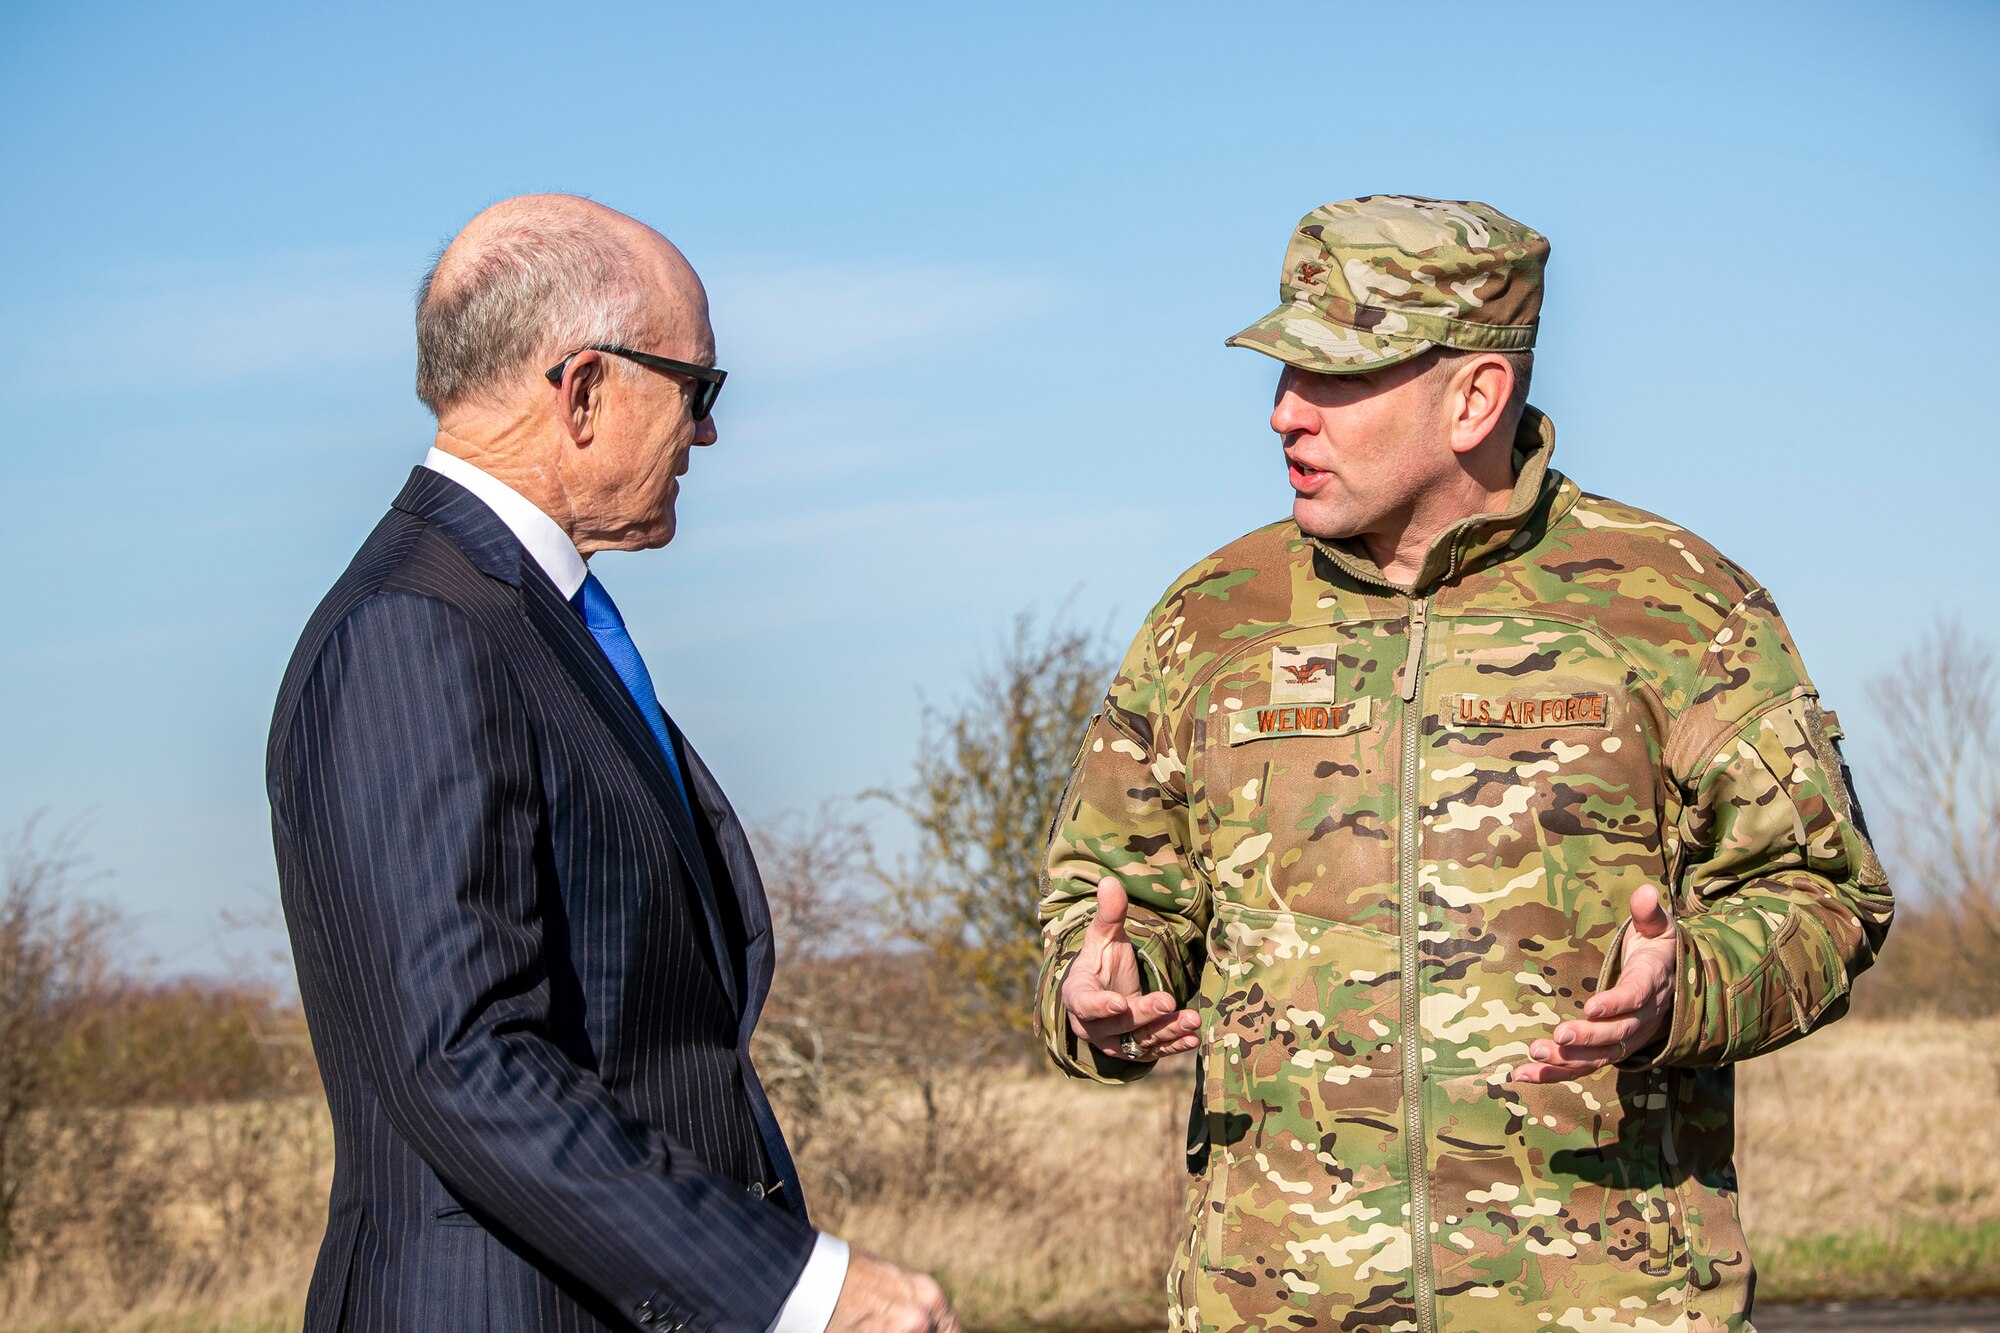 U.S. Air Force Col. Kurt Wendt, (right), speaks with United States Ambassador to the United Kingdom, Robert Wood Johnson, (left), during a visit to RAF Molesworth, England, Feb. 7, 2020. Johnson visited RAF Molesworth, which is part of the 501st Combat Support Wing, to build more relationships with personnel and gain a better understanding of their overall mission, capabilities and comprehensive duties. (U.S. Air Force photo by Senior Airman Eugene Oliver)